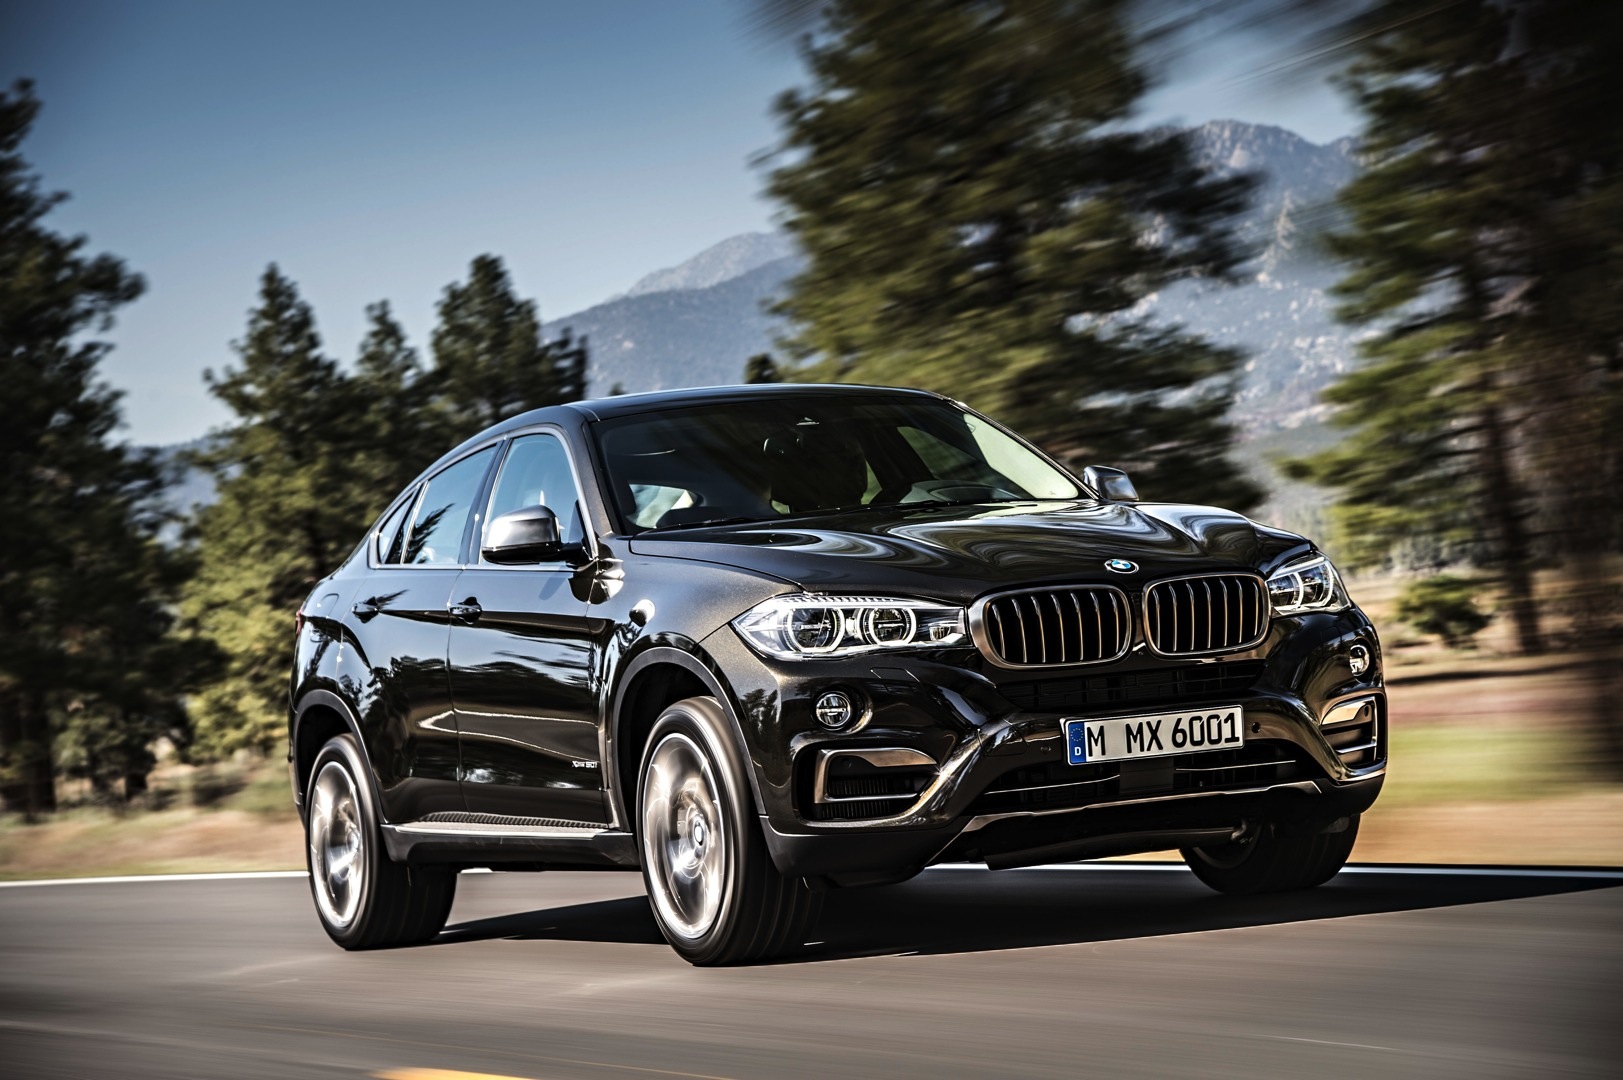 2016 BMW F16 X6 Unveiled in All Its Glory - Photo Gallery